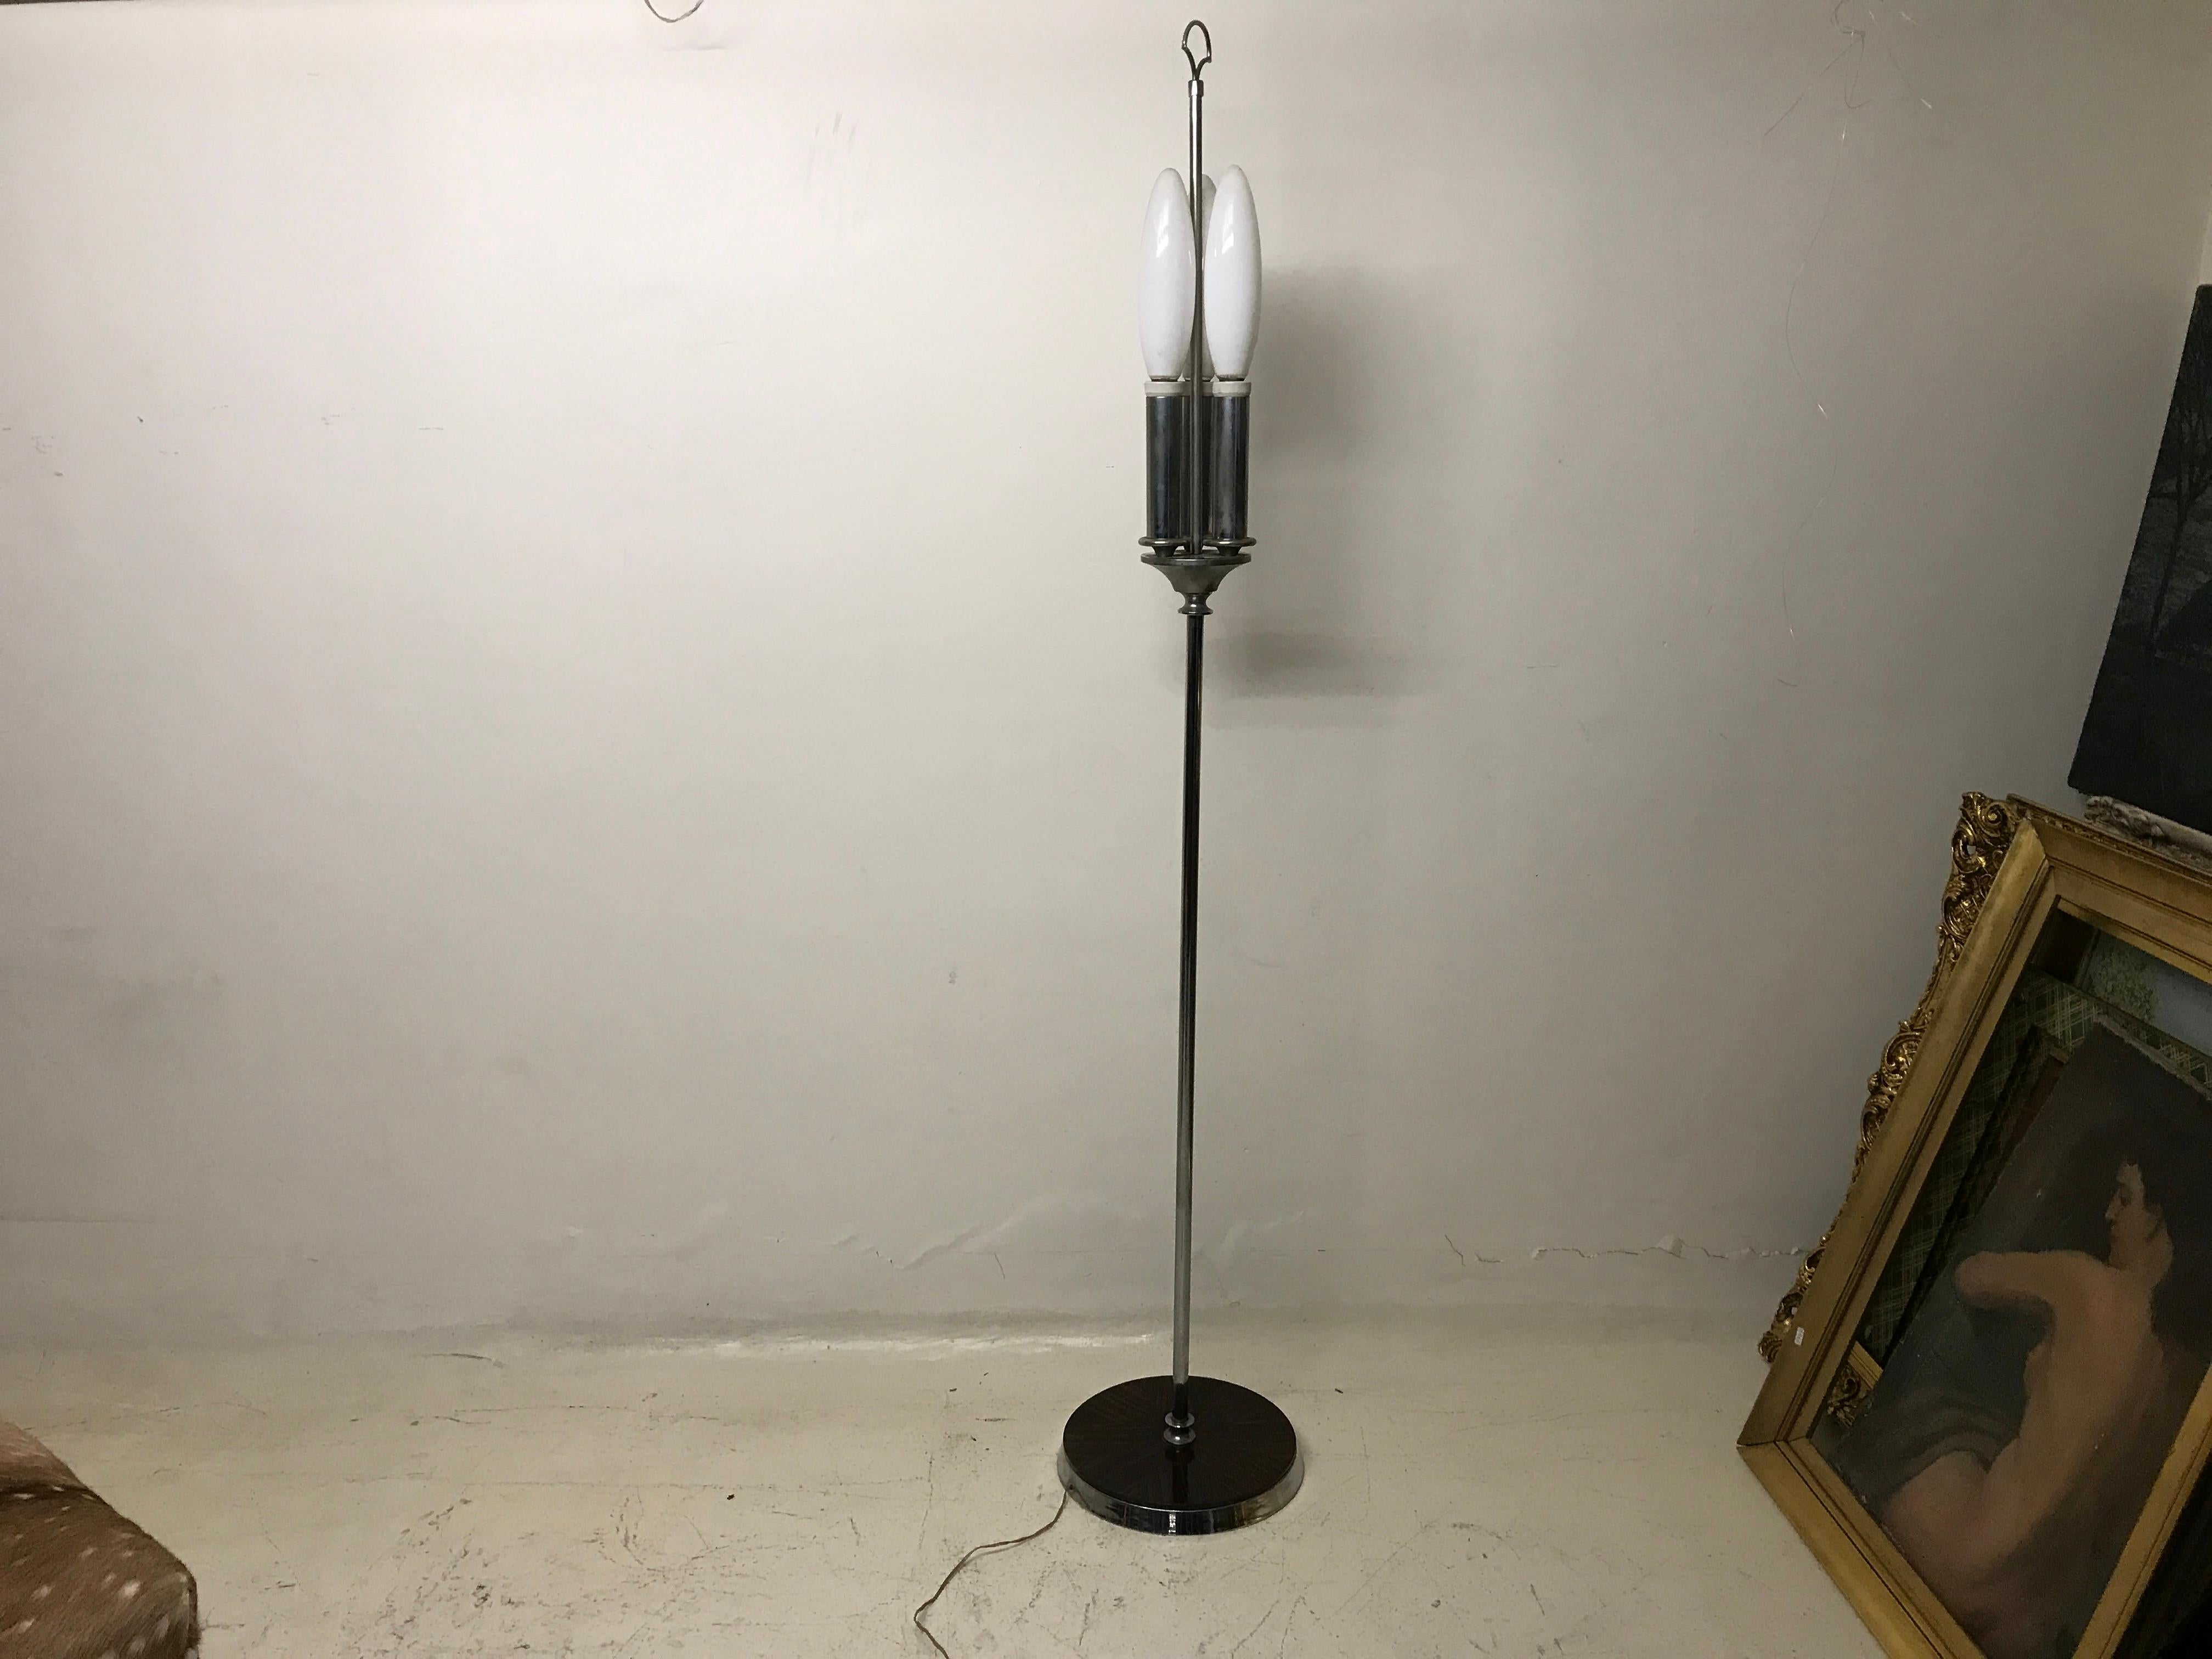 Floor lamp Art Deco

Materials: chrome and wood
France
1930
You want to live in the golden years, those are the floor lamps that your project needs.
We have specialized in the sale of Art Deco and Art Nouveau styles since 1982.
Pushing the button